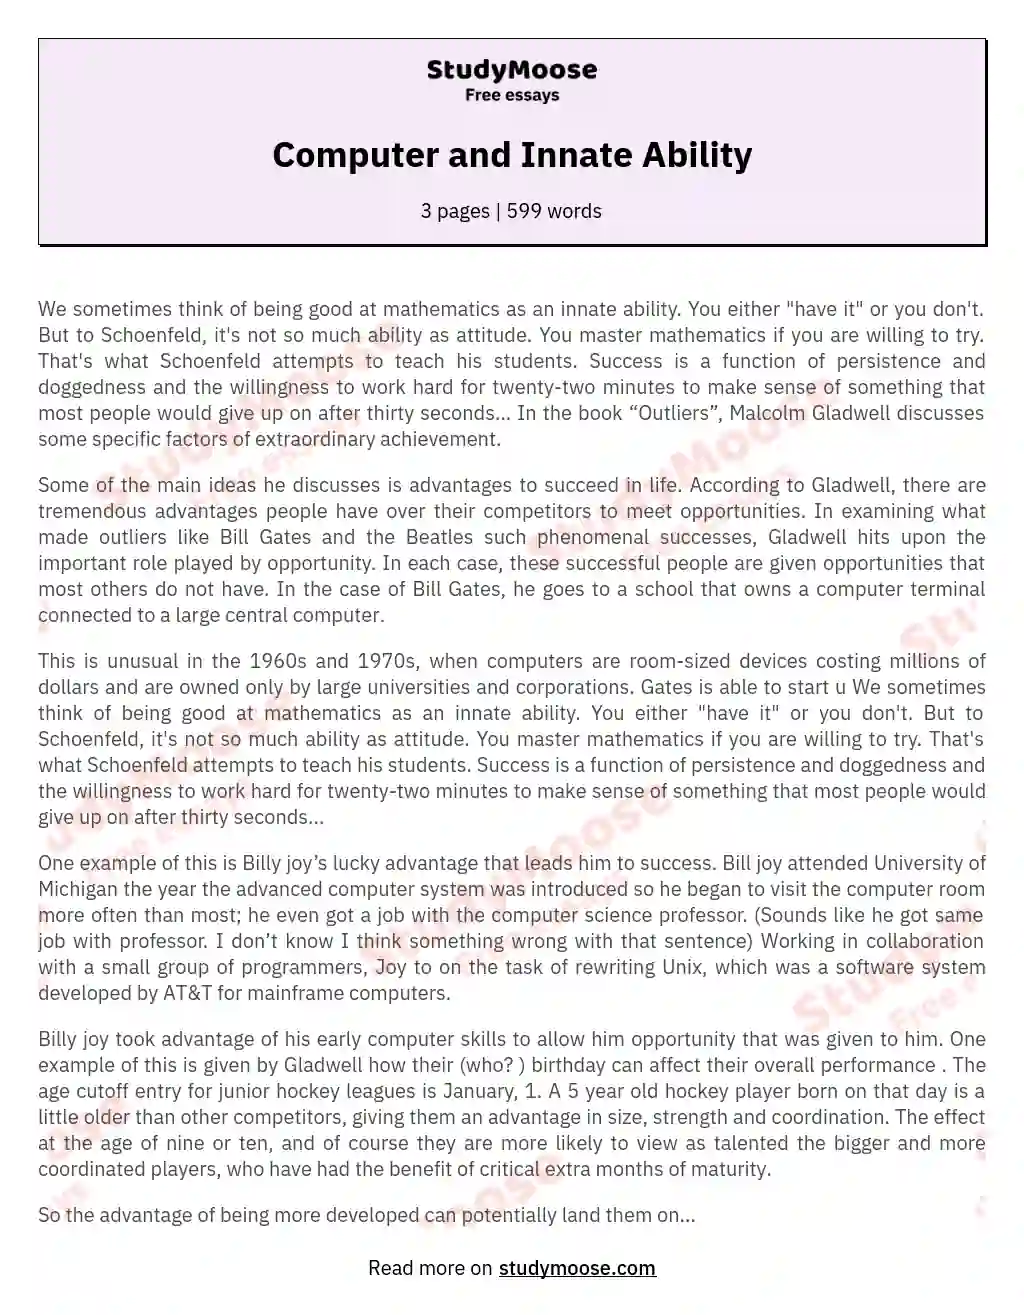 Computer and Innate Ability essay